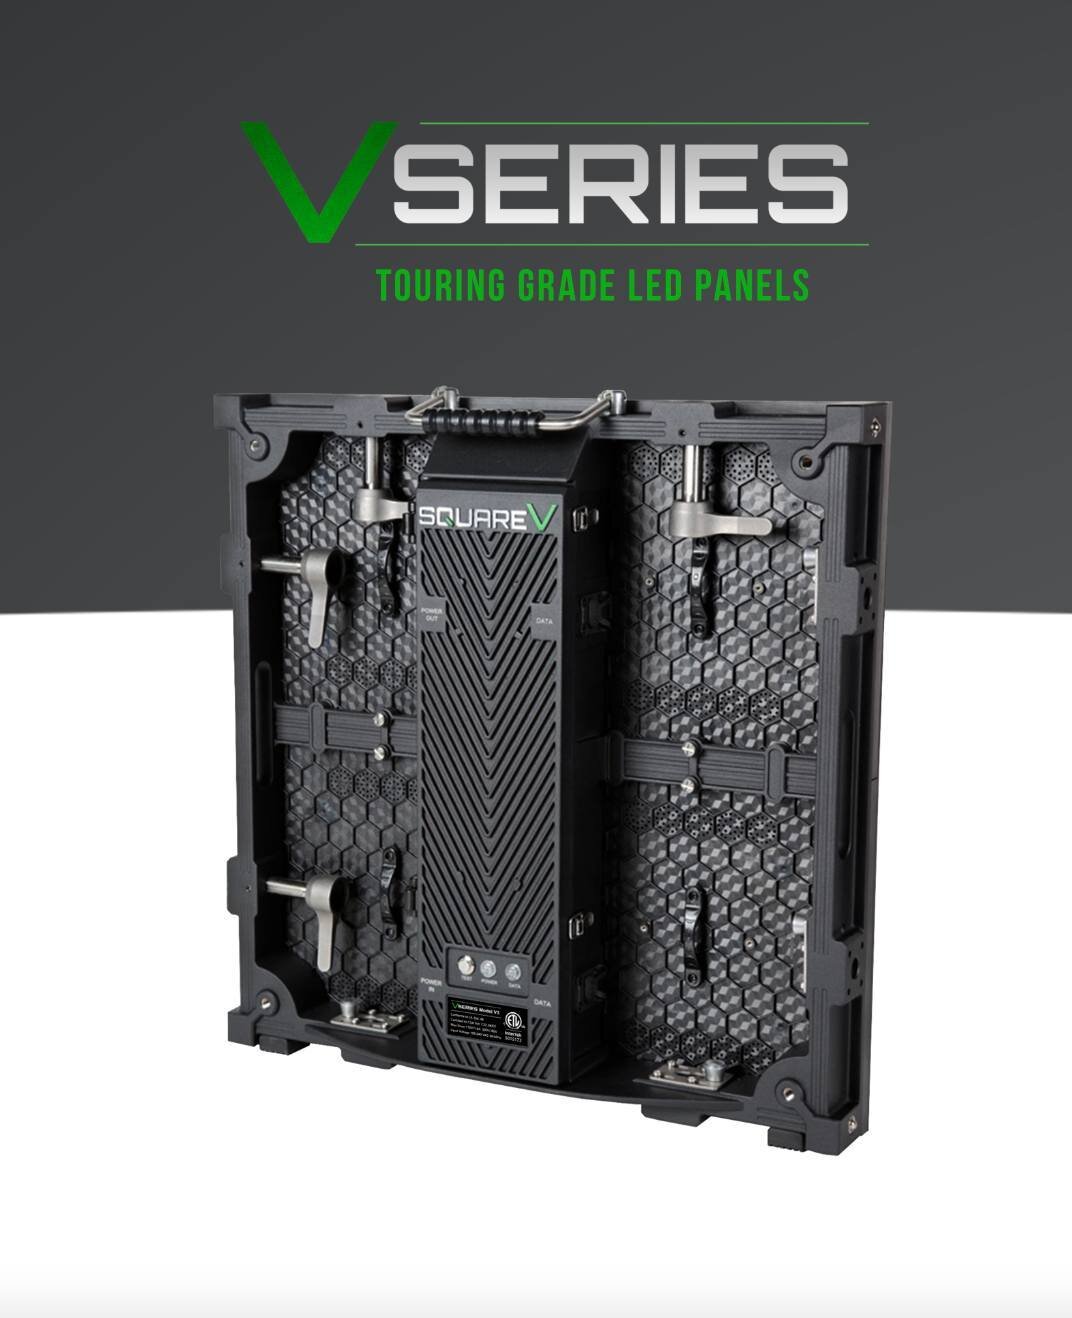 Our award-winning V Series panels are the perfect choice for both indoor and outdoor applications that require a portable LED wall.

They&rsquo;re easy to assemble and tear down. Every model uses the same die-cast aluminum frame and magnetically atta